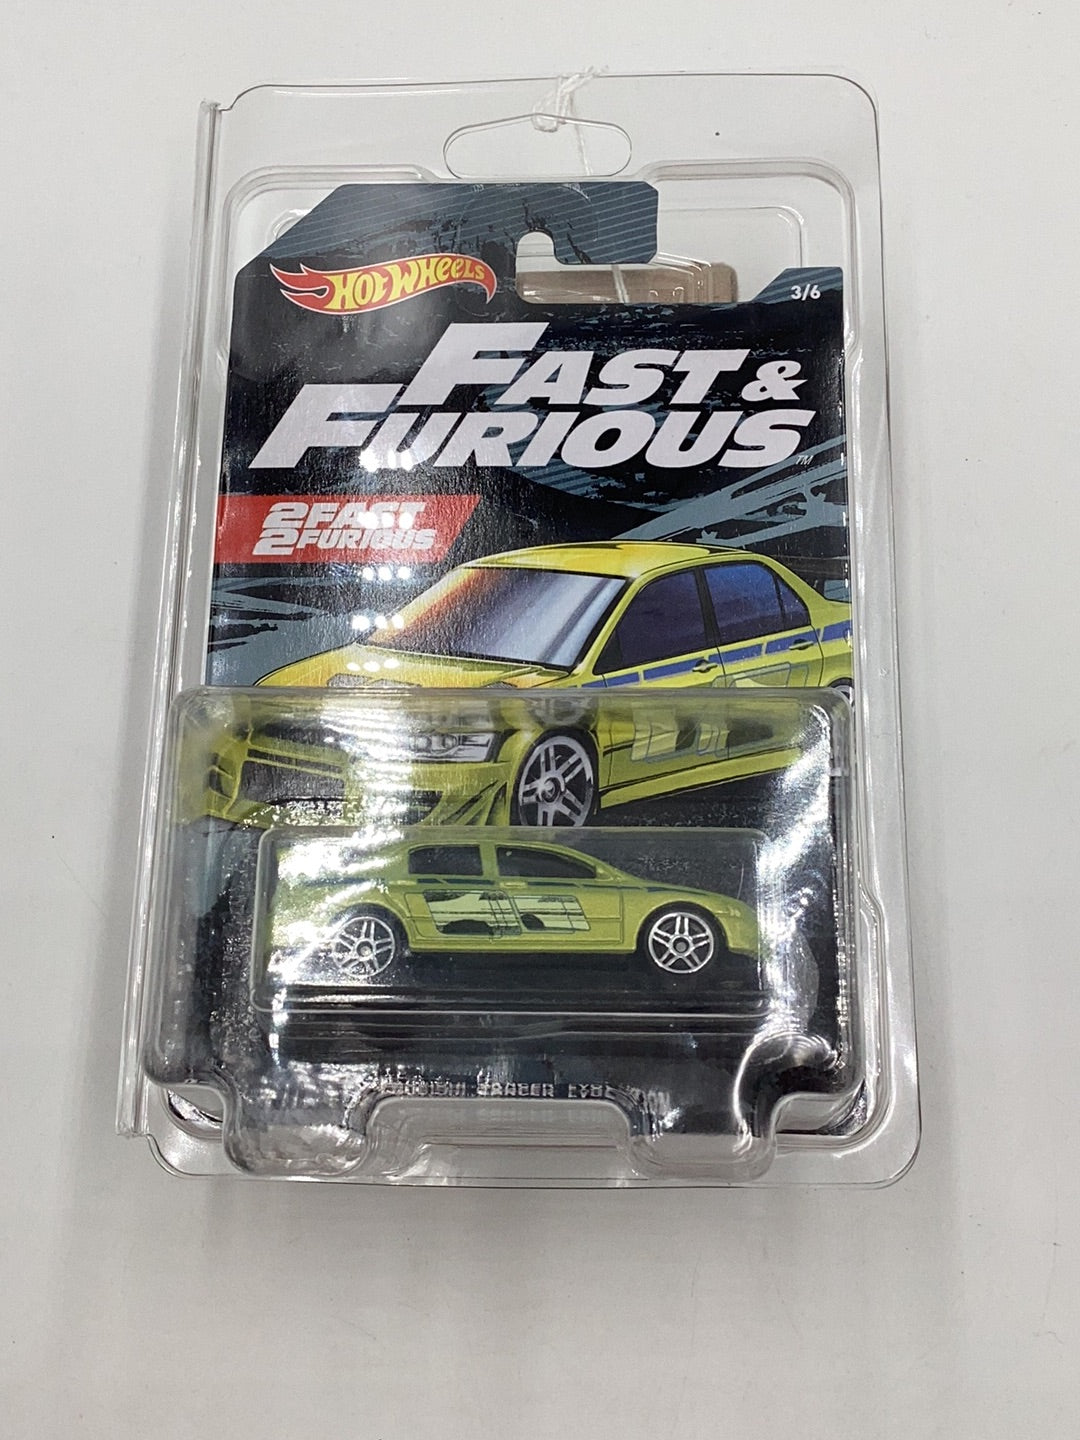 Hot wheels fast and furious 3/6 Mitsubishi Lancer Evolution with protector